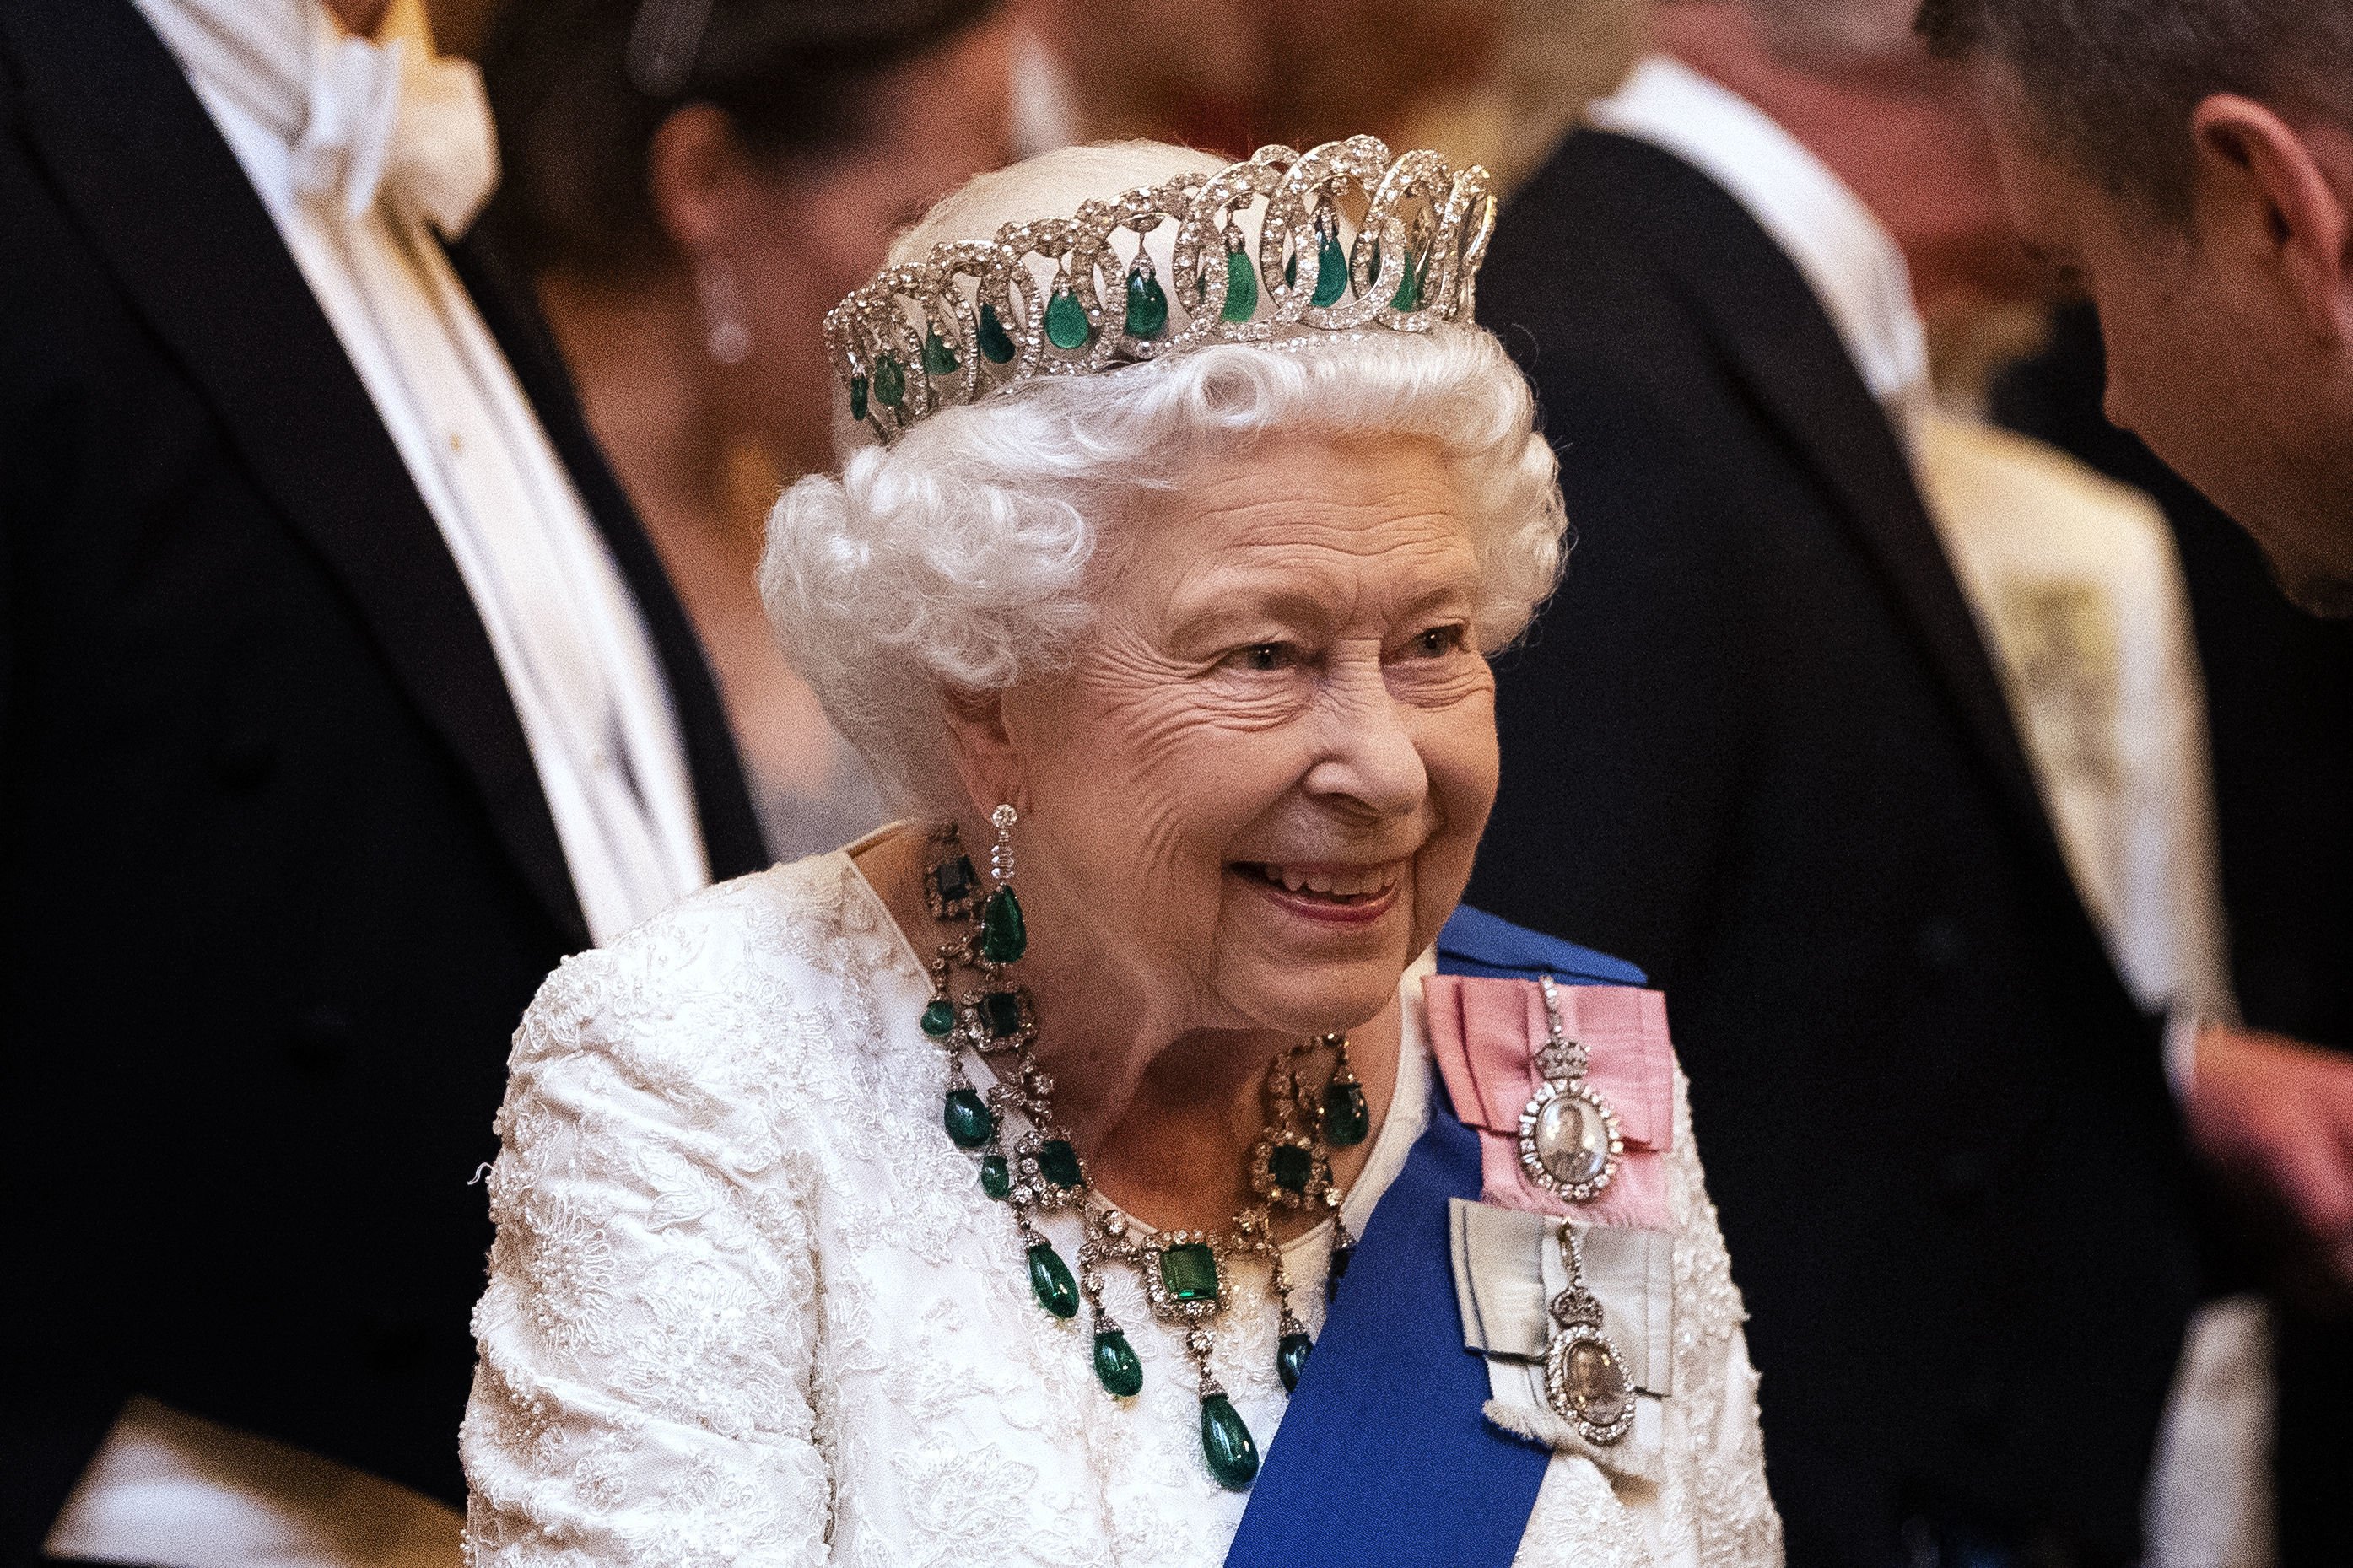 Queen Elizabeth II talks to guests at an evening reception for members of the Diplomatic Corps at Buckingham Palace on December 11, 2019, in London, England. | Source: Getty Images